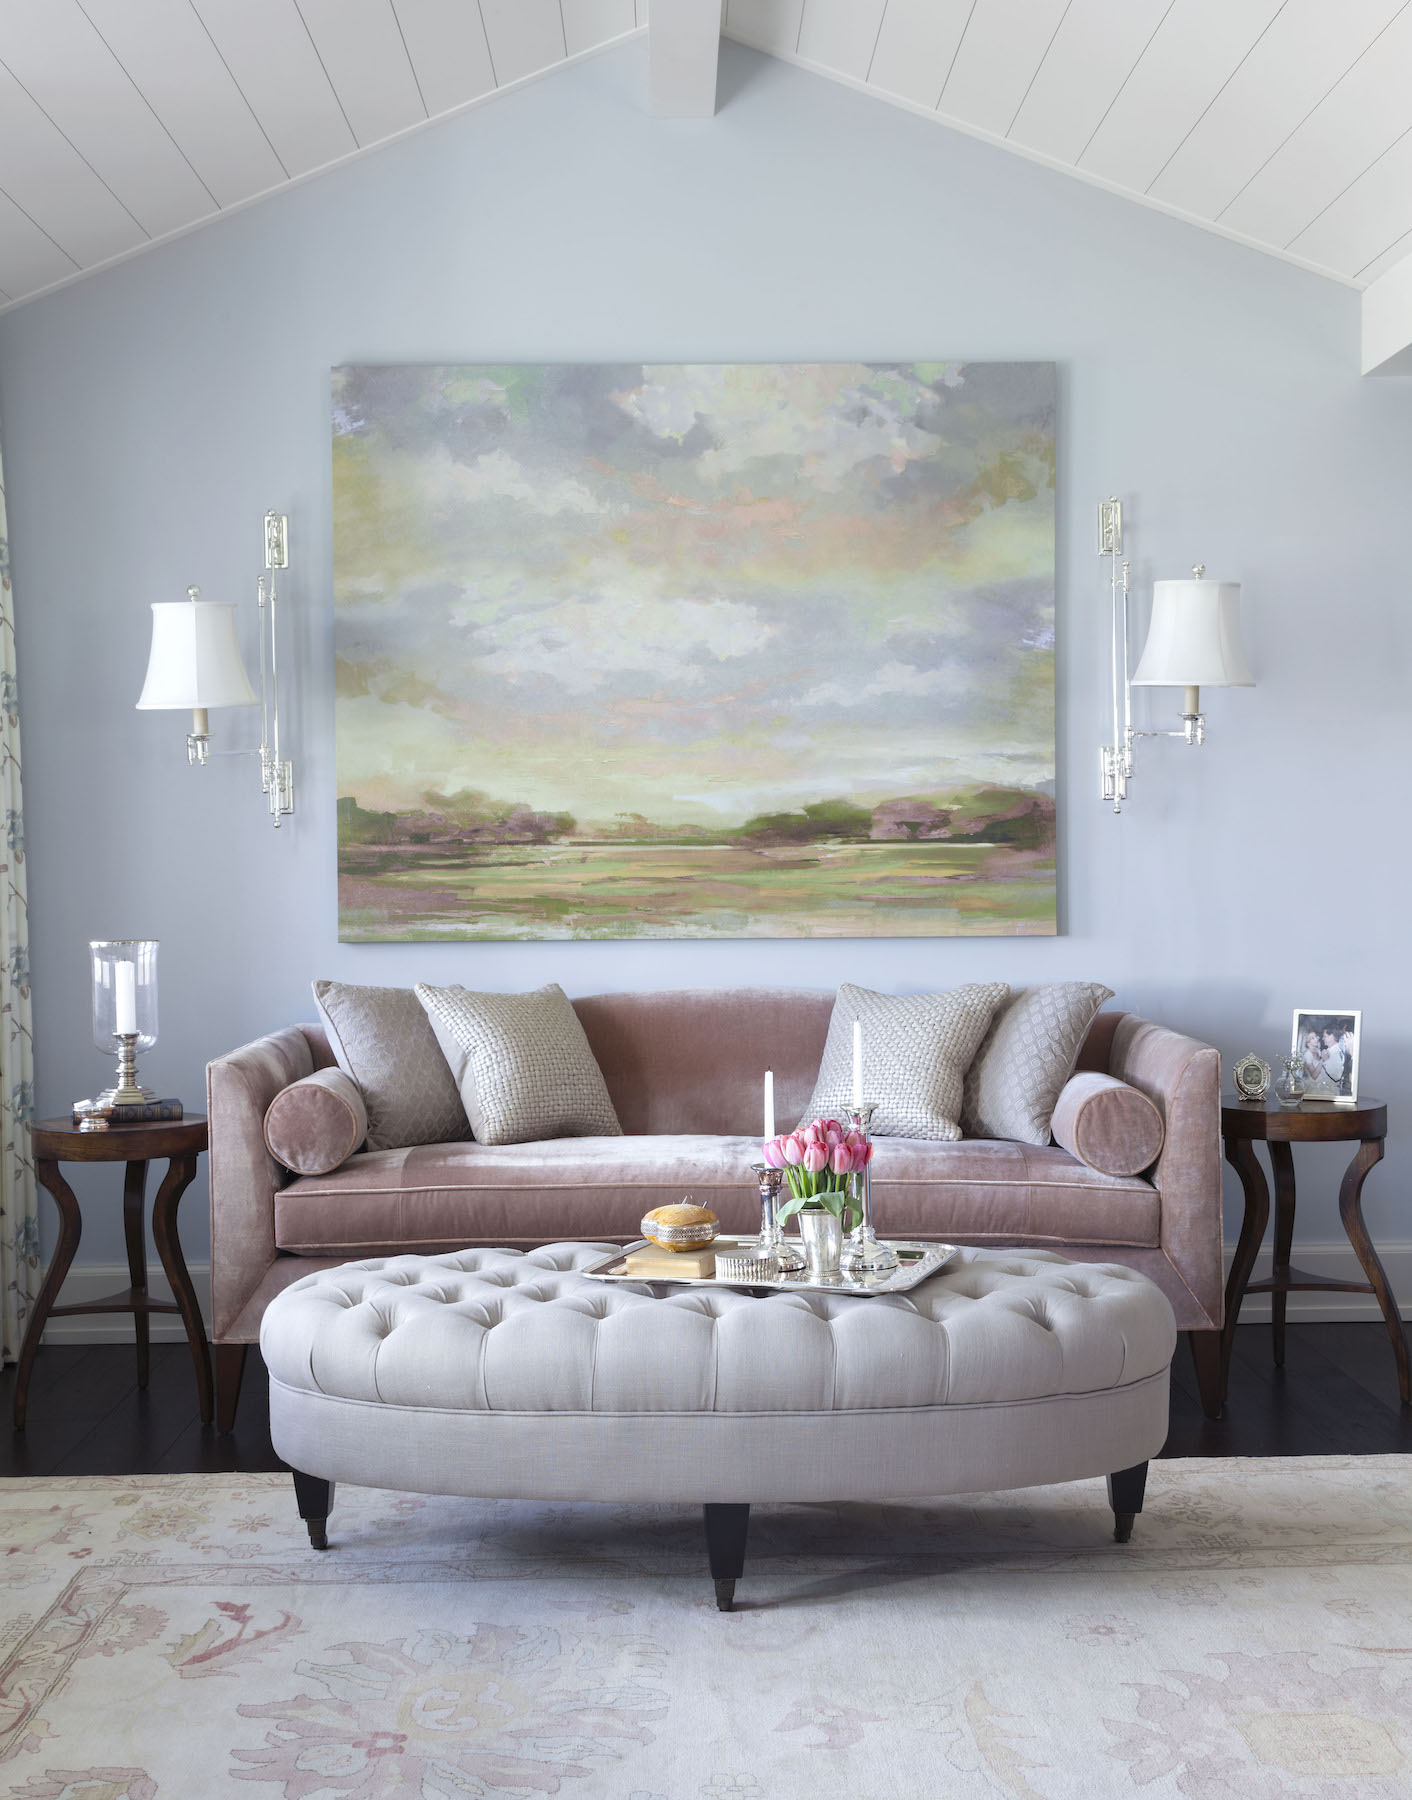 A living room in pastel shades by interior designer Lonni Paul in Effect Magazine